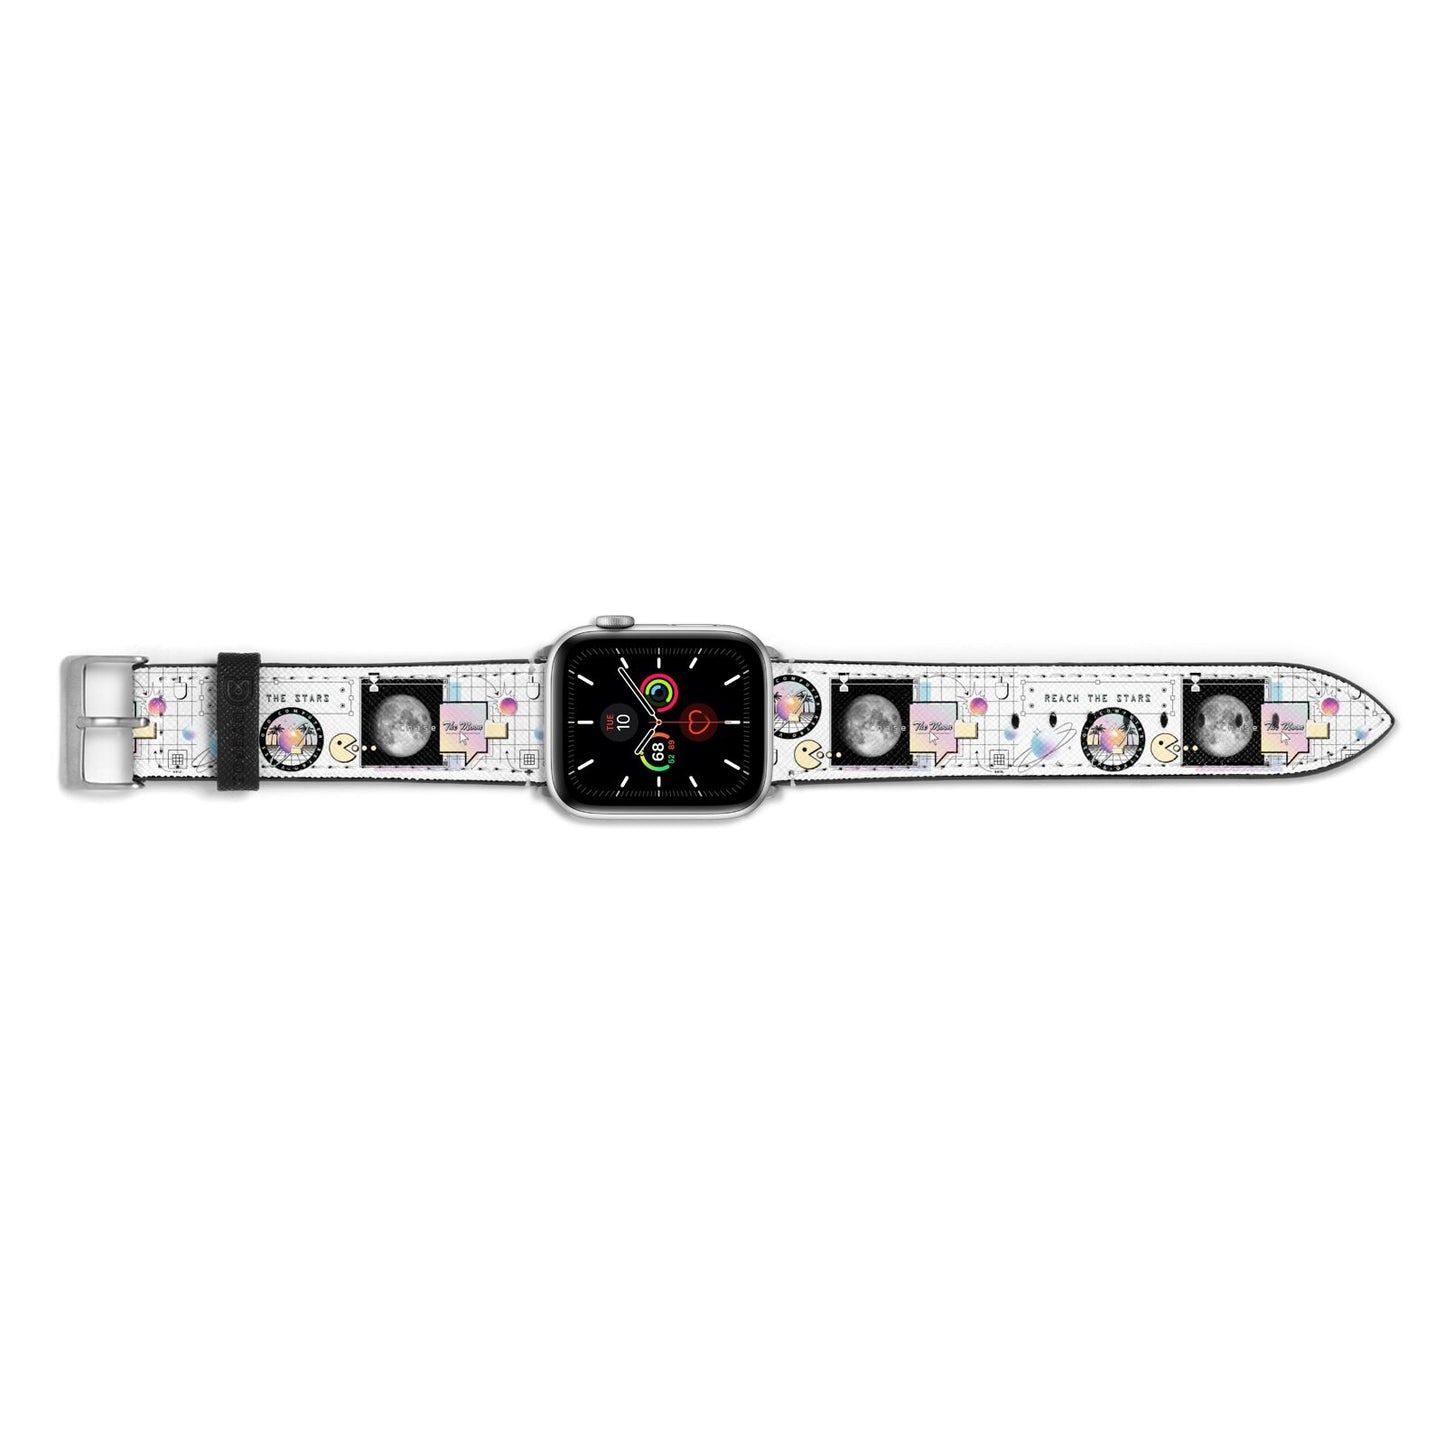 Chase The Moon Apple Watch Strap Landscape Image Silver Hardware